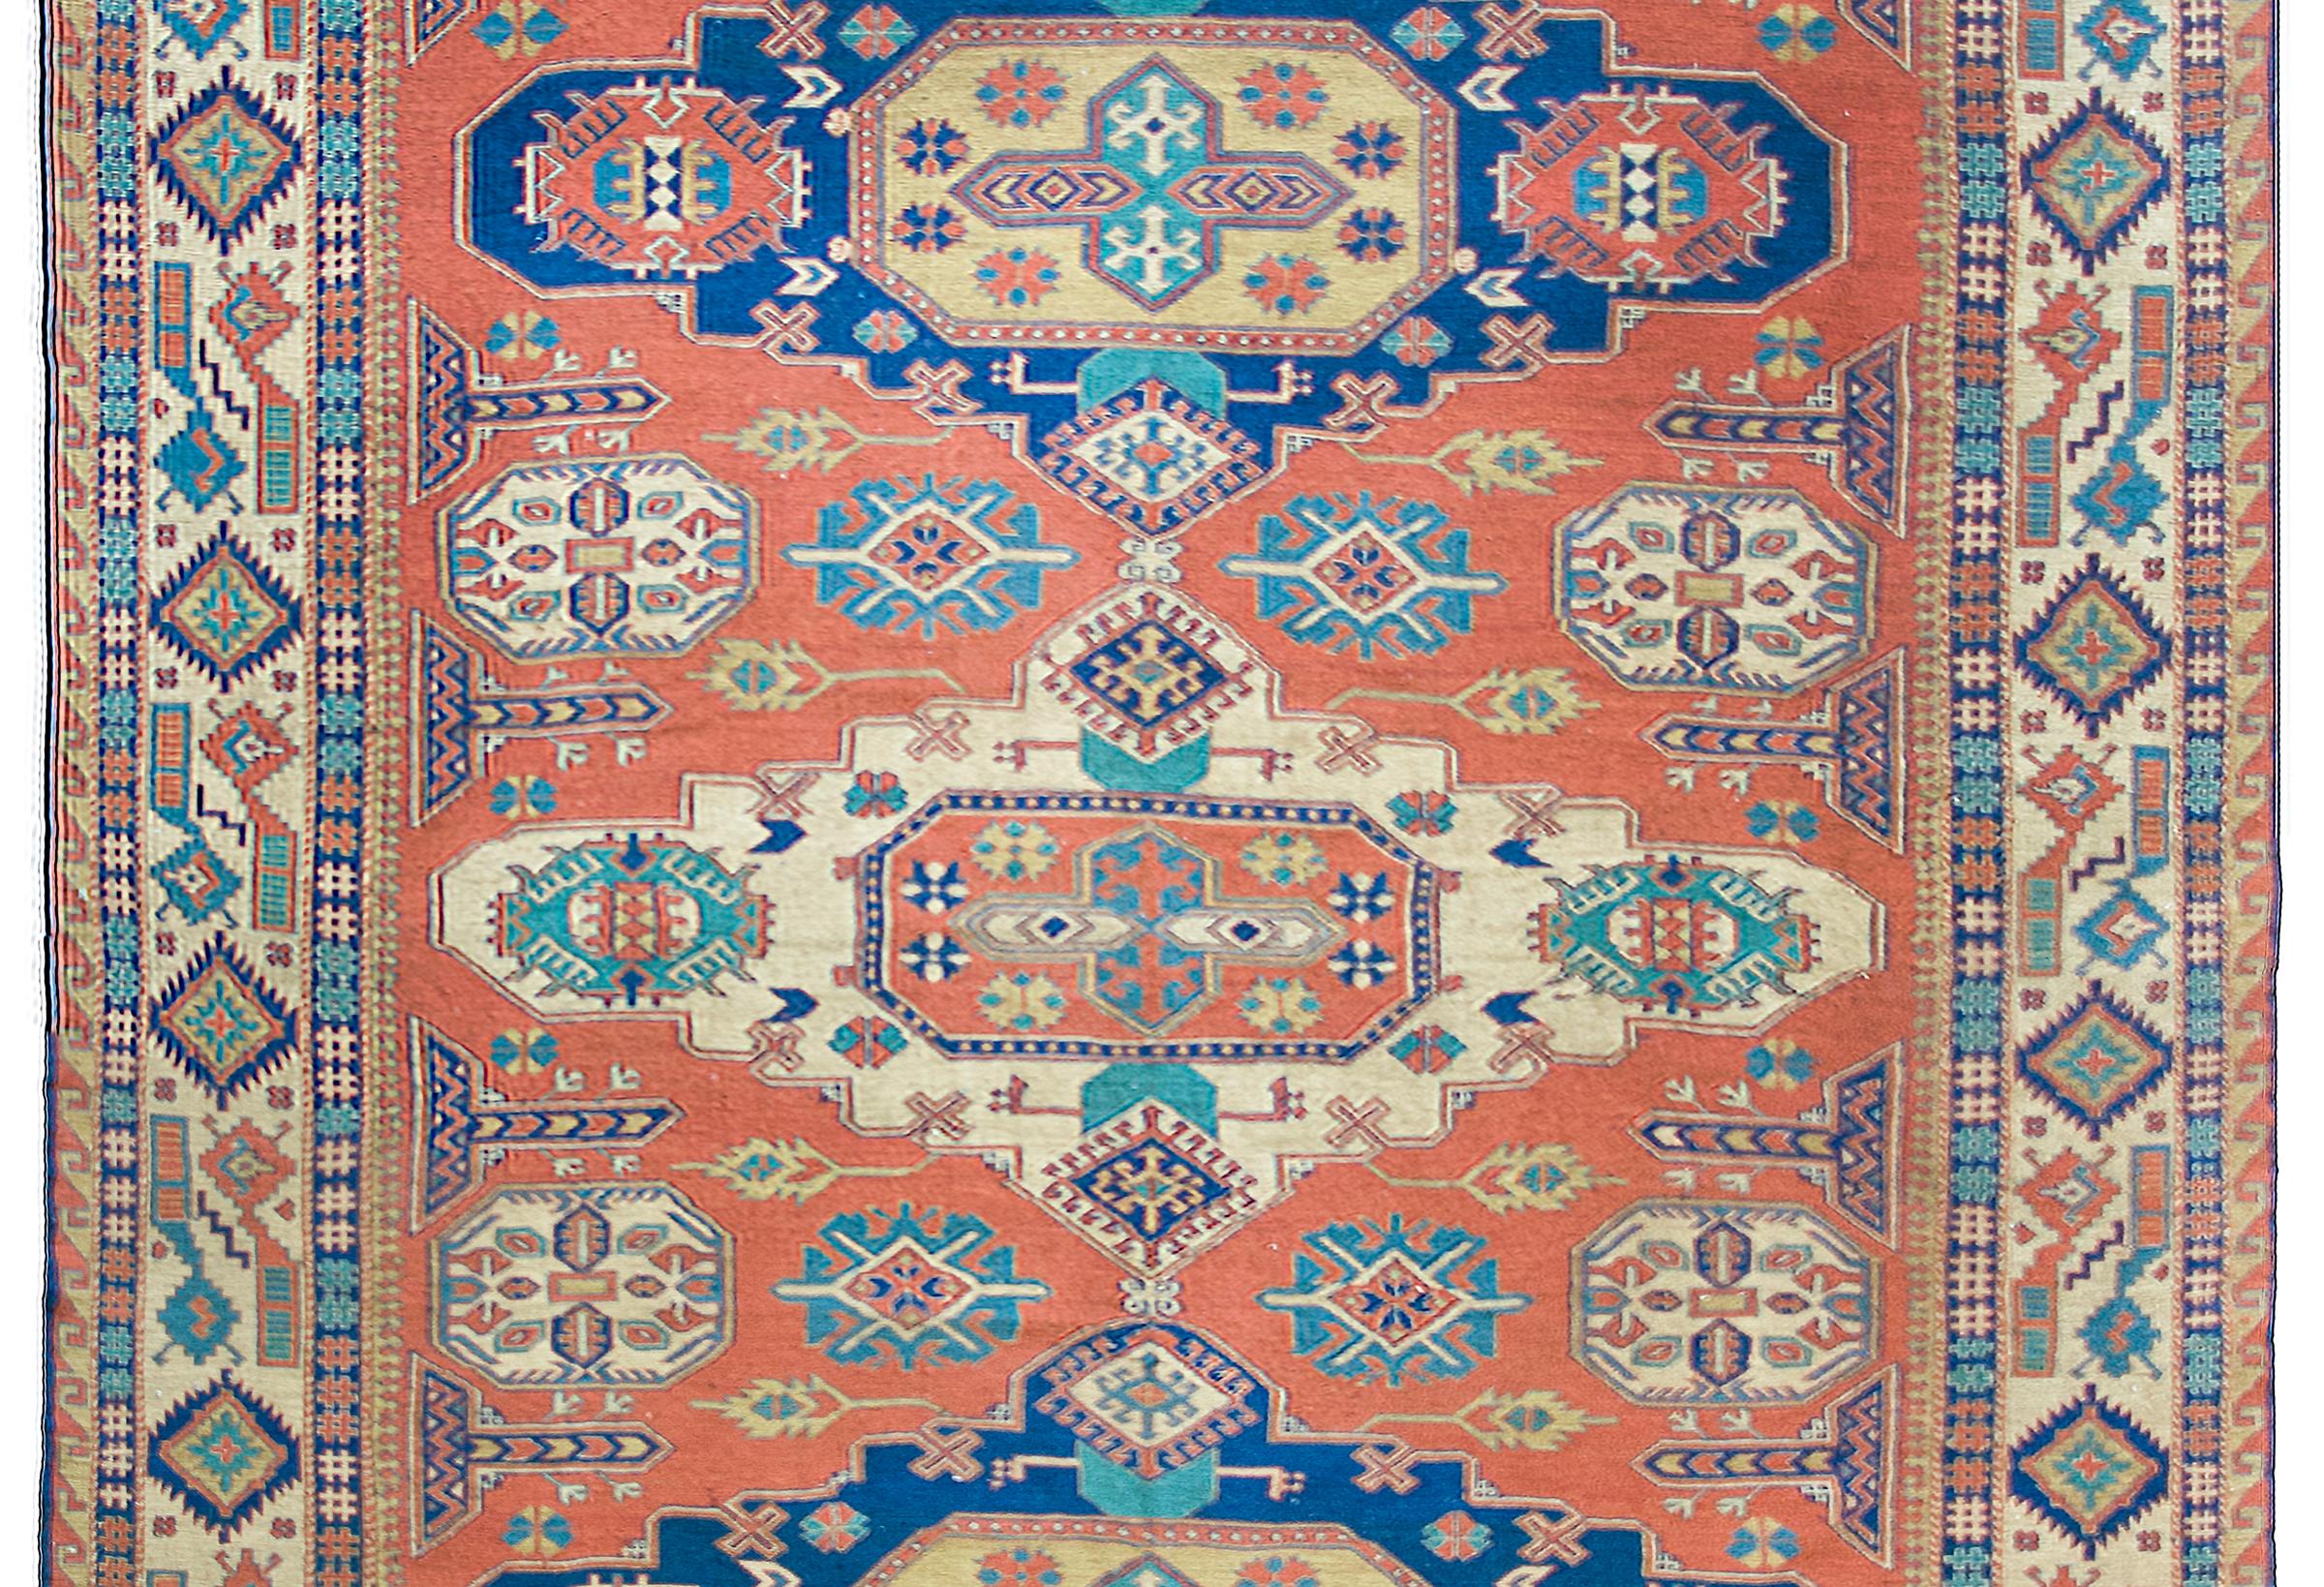 An incredible vintage mid-20th century Persian Afghani Soumak rug three large central medallions amidst a field with myriad stylized flowers and leaves, surrounded by the most incredible stylized floral medallion flanked by sets of geometric